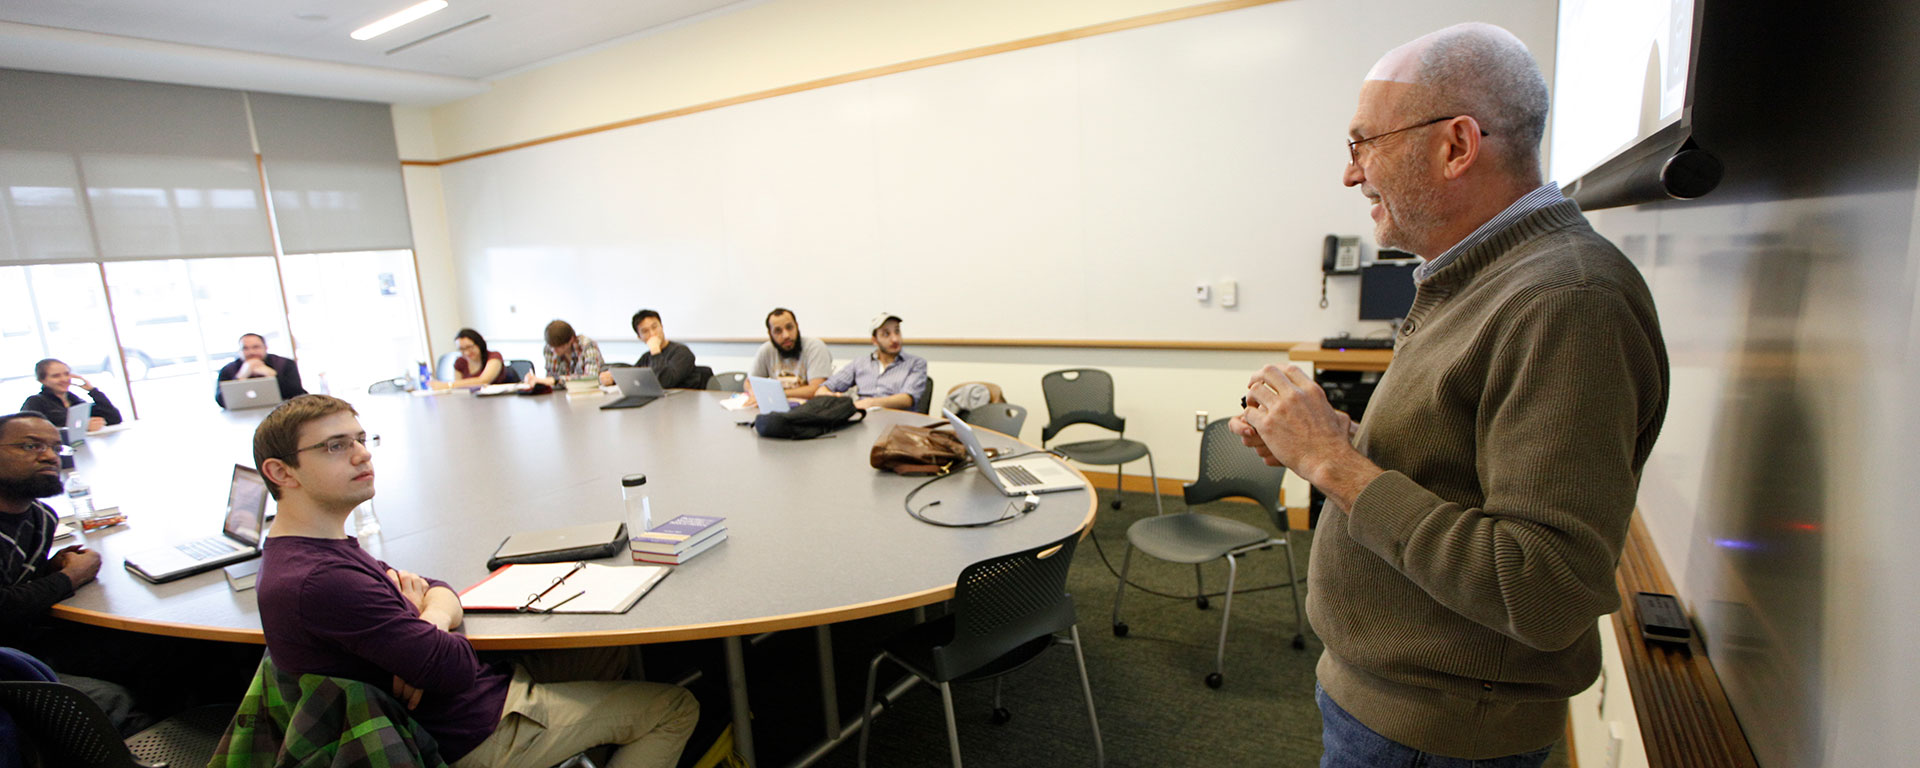 A professor speaks to a group of students sitting around a table in class